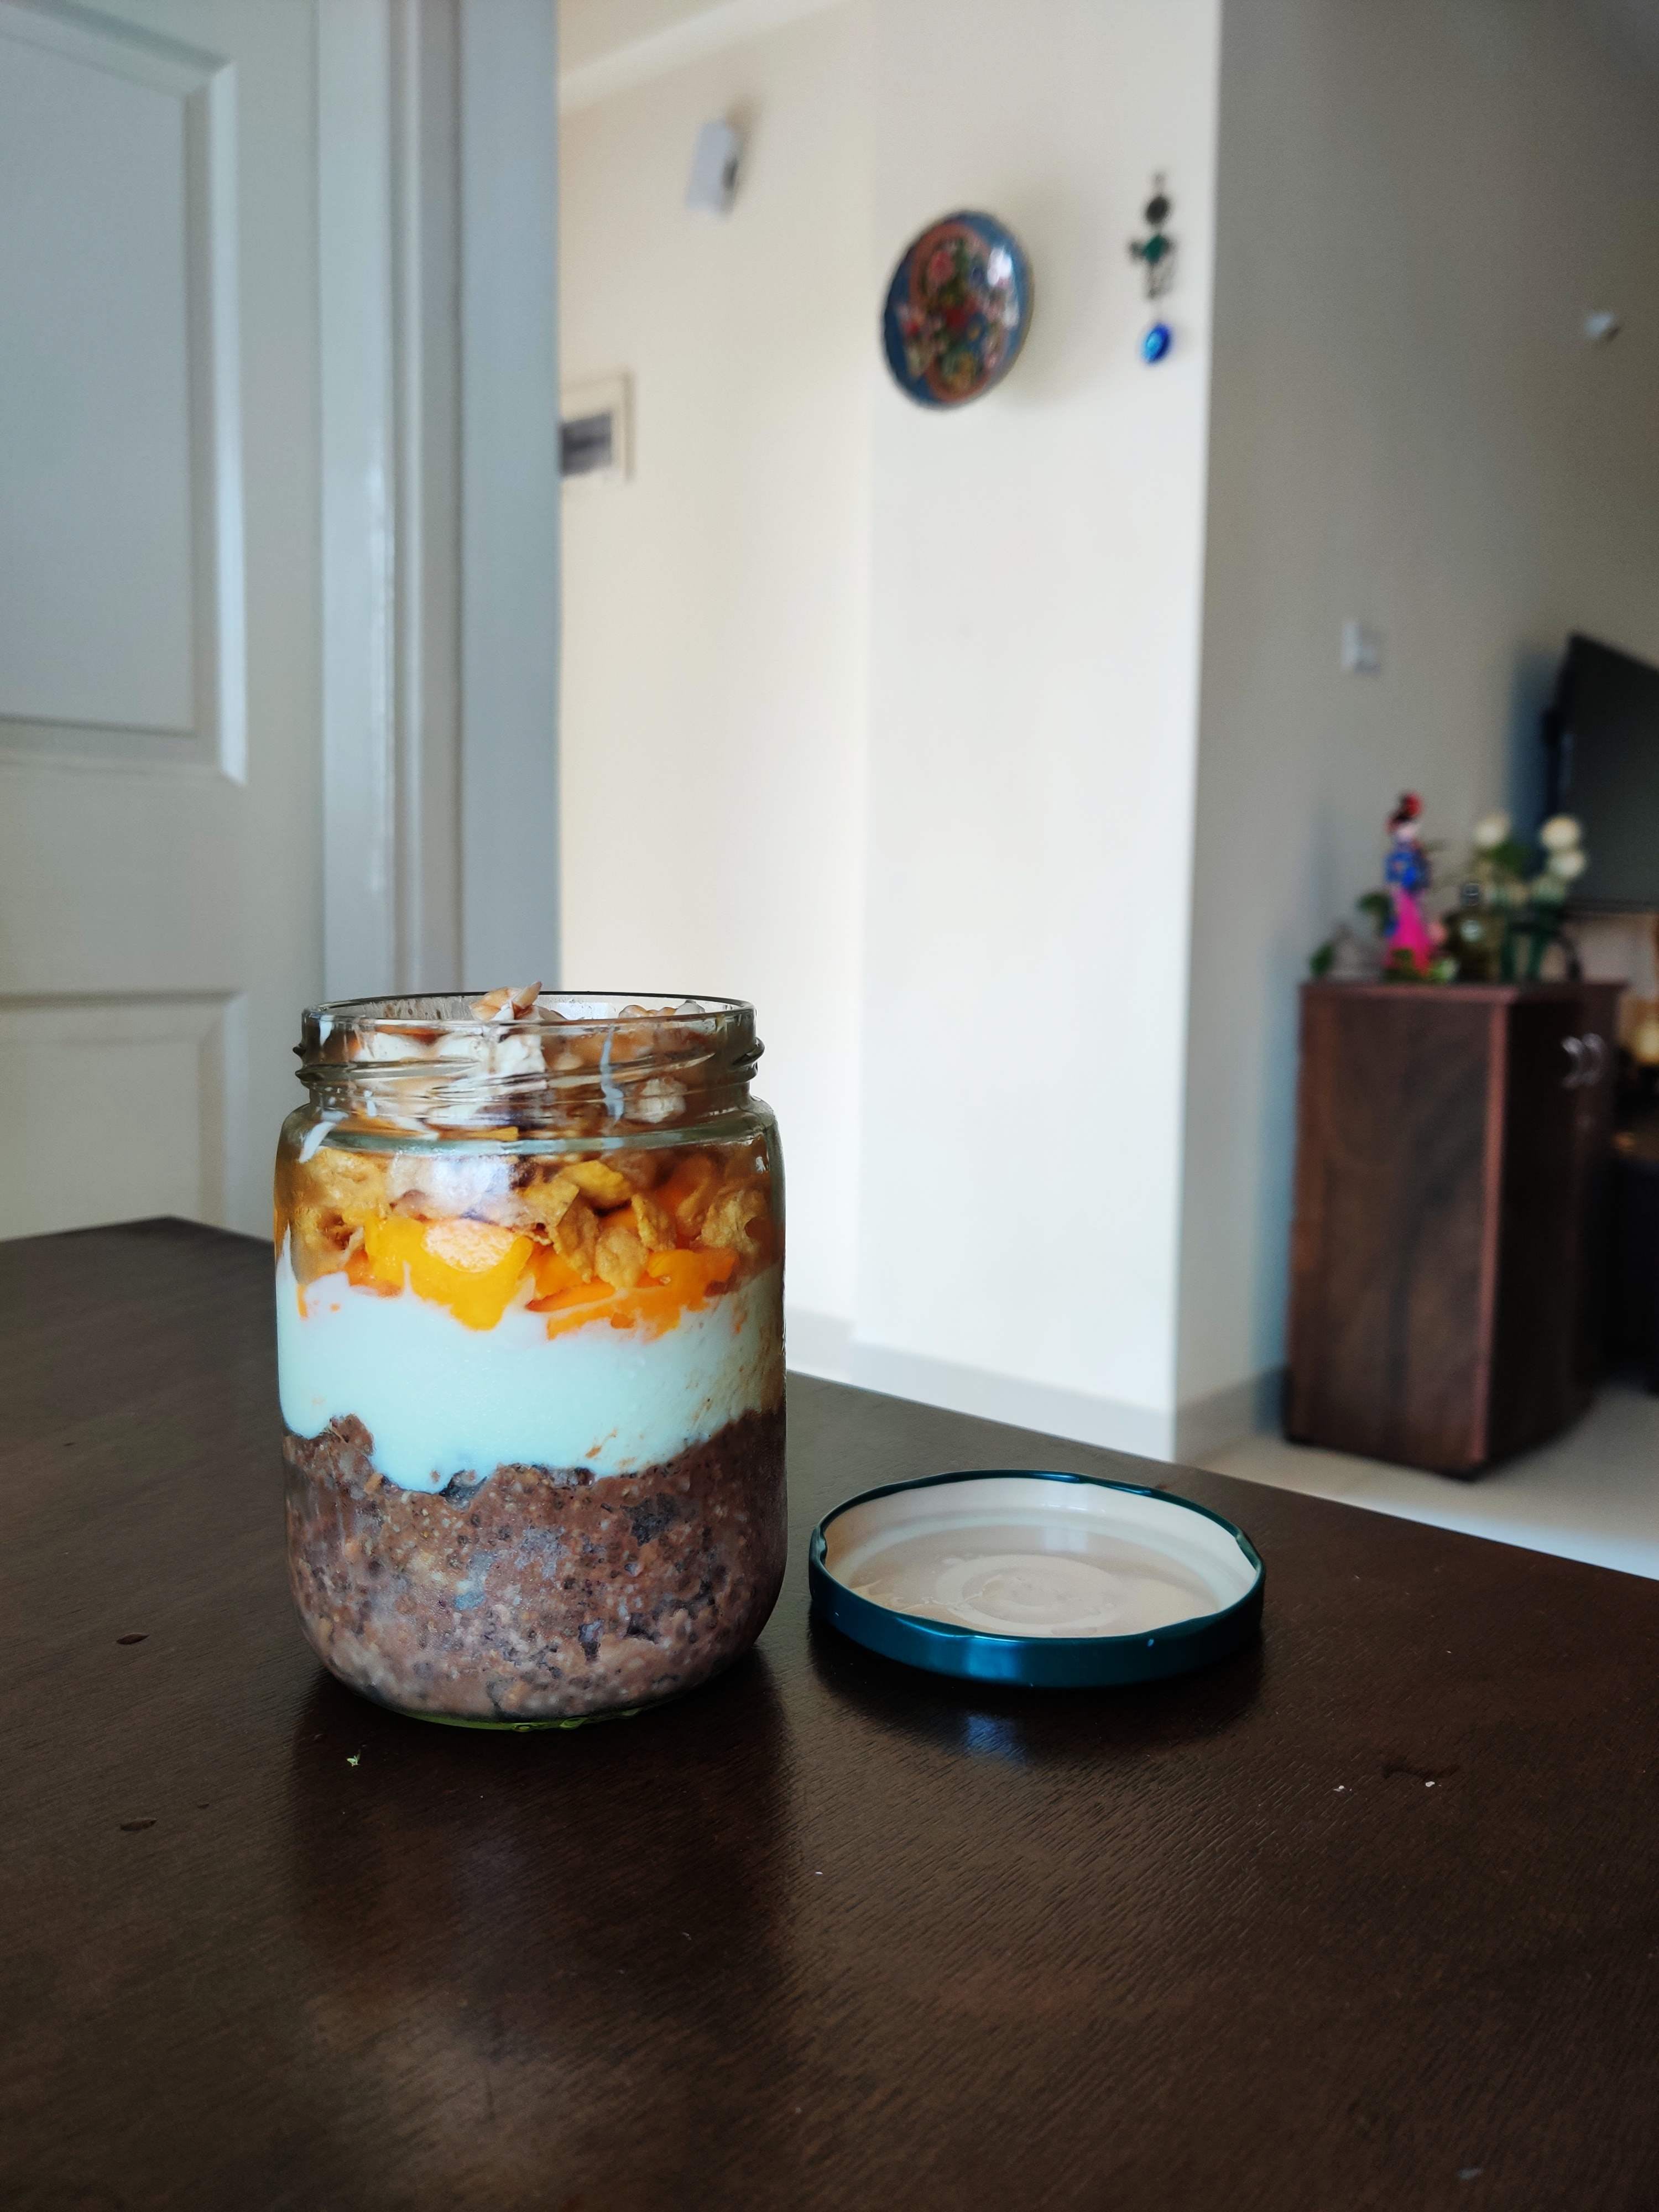 Perfect Parfait For This Weekend! No cooking time, only 15 mins preparation time.